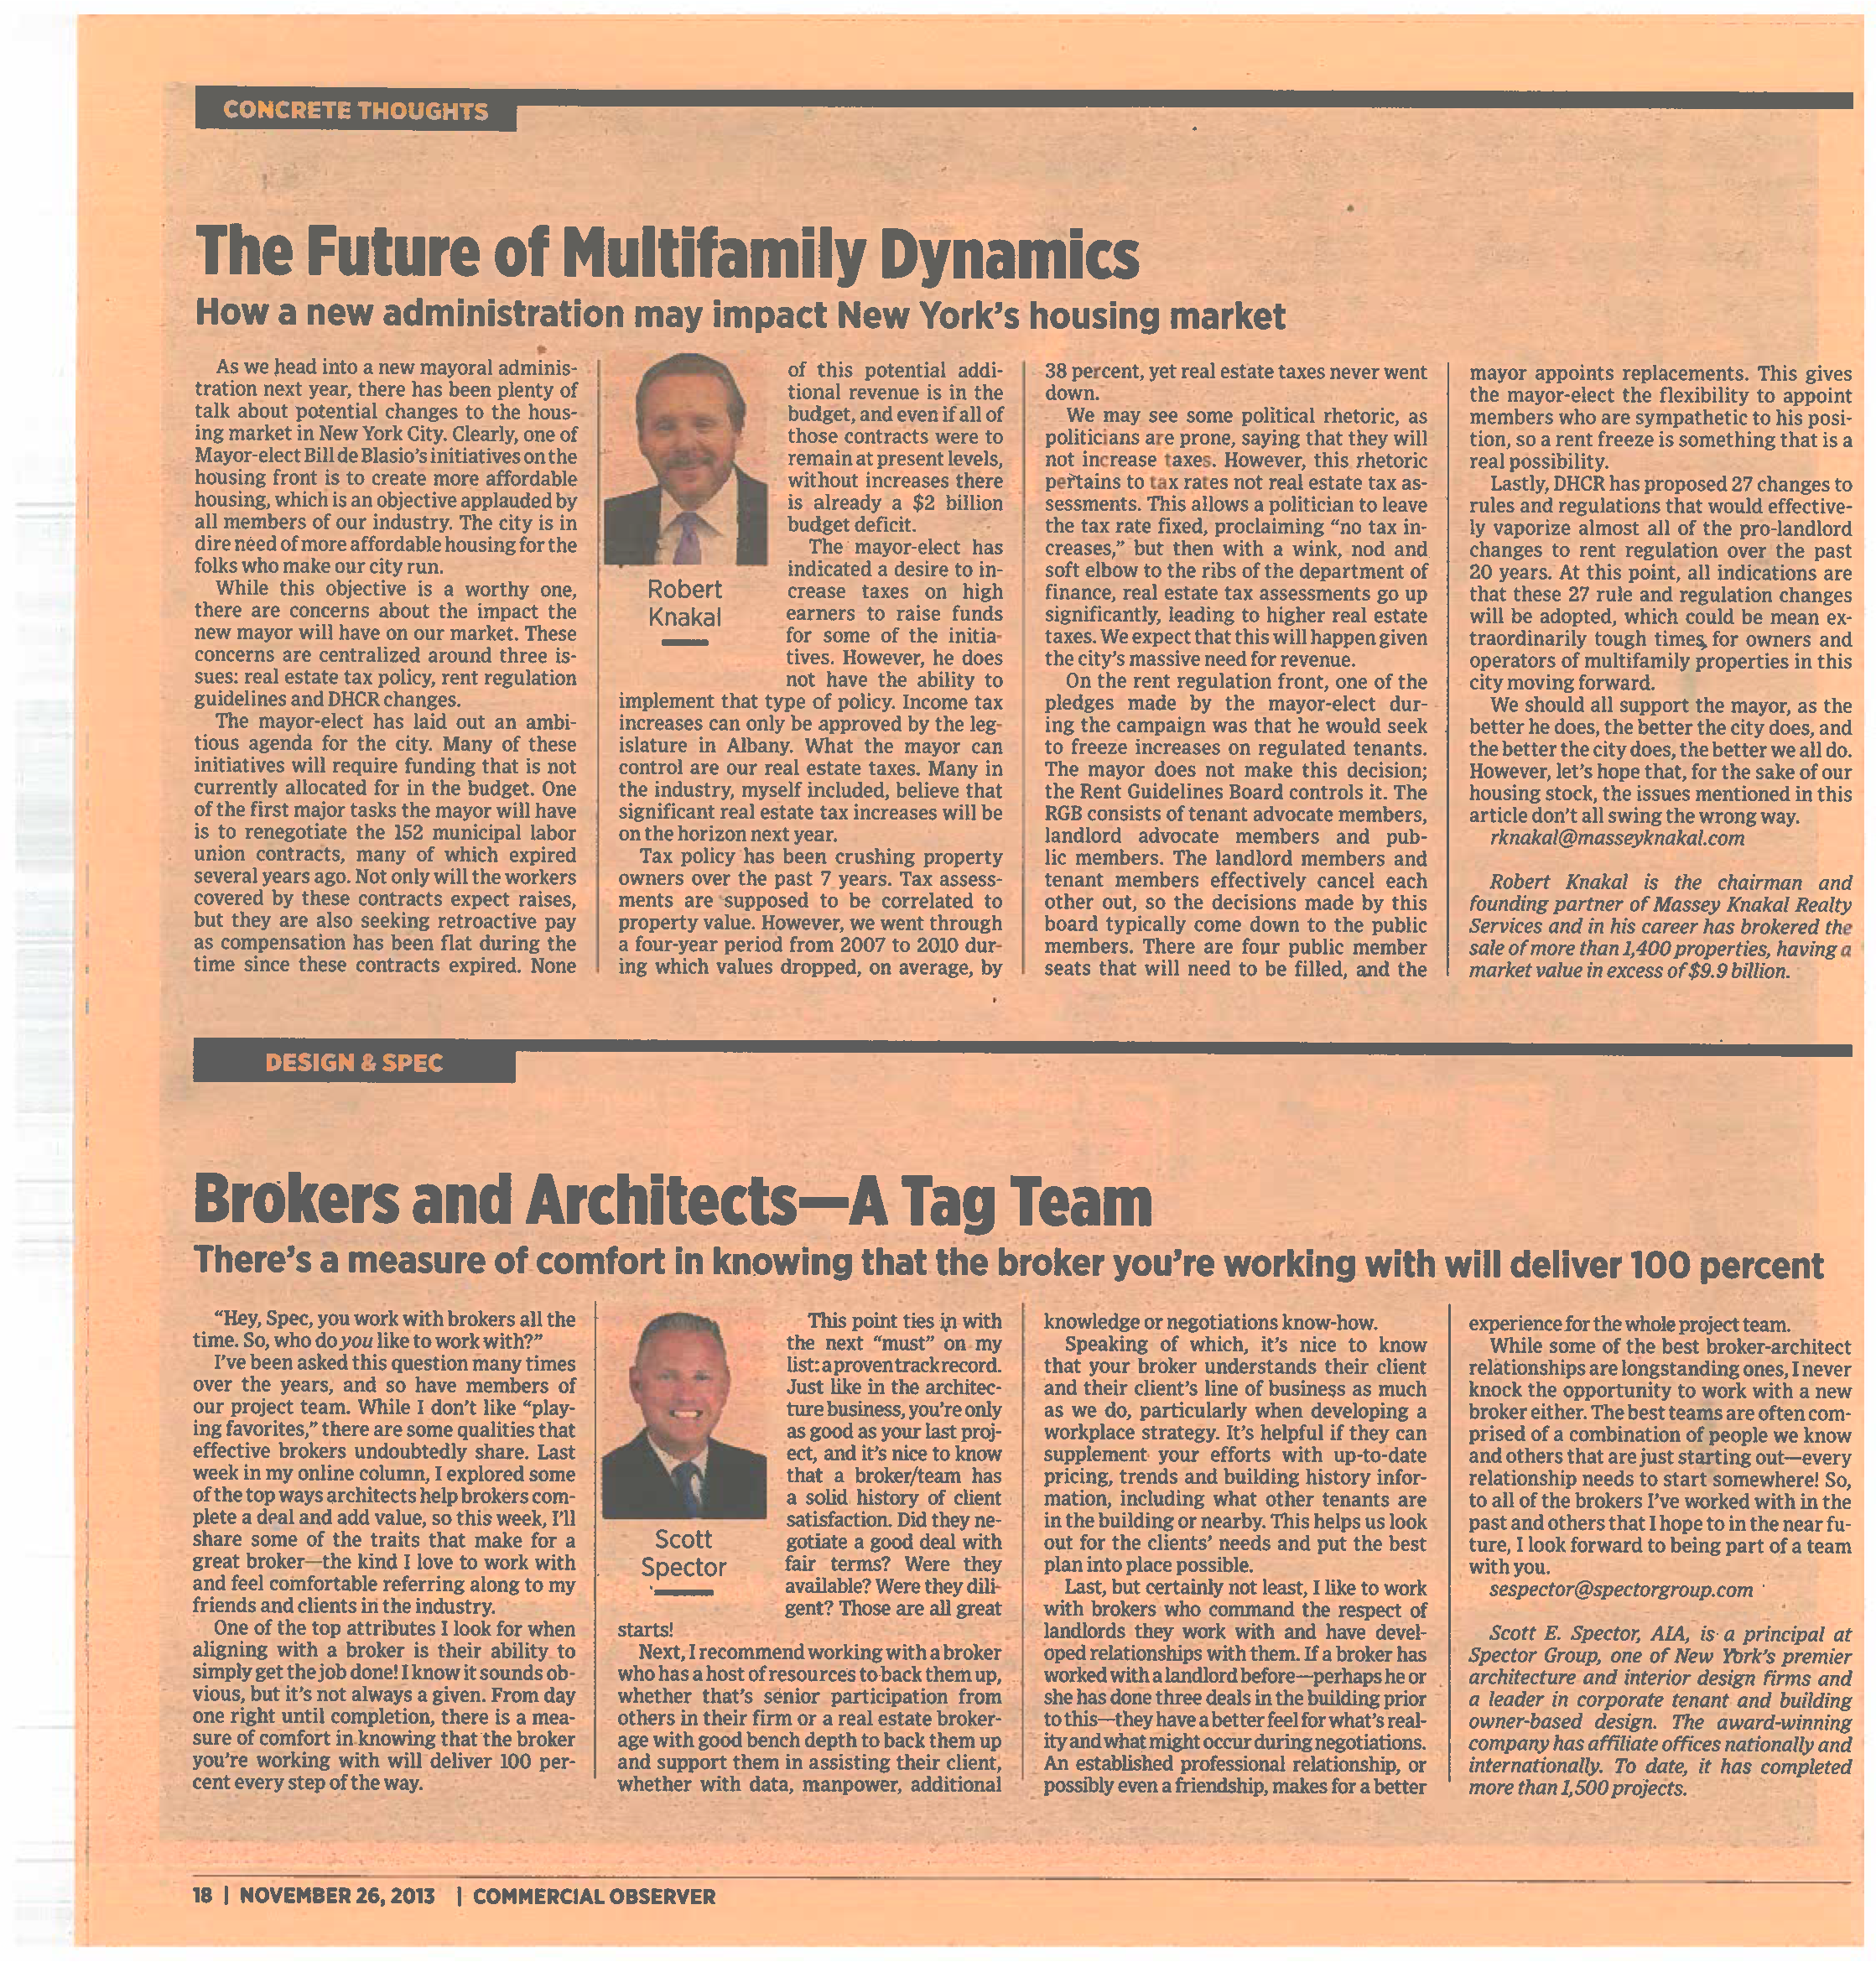 Concrete Thoughts - The Future of Multifamily Dynamics - Nov 26 2013